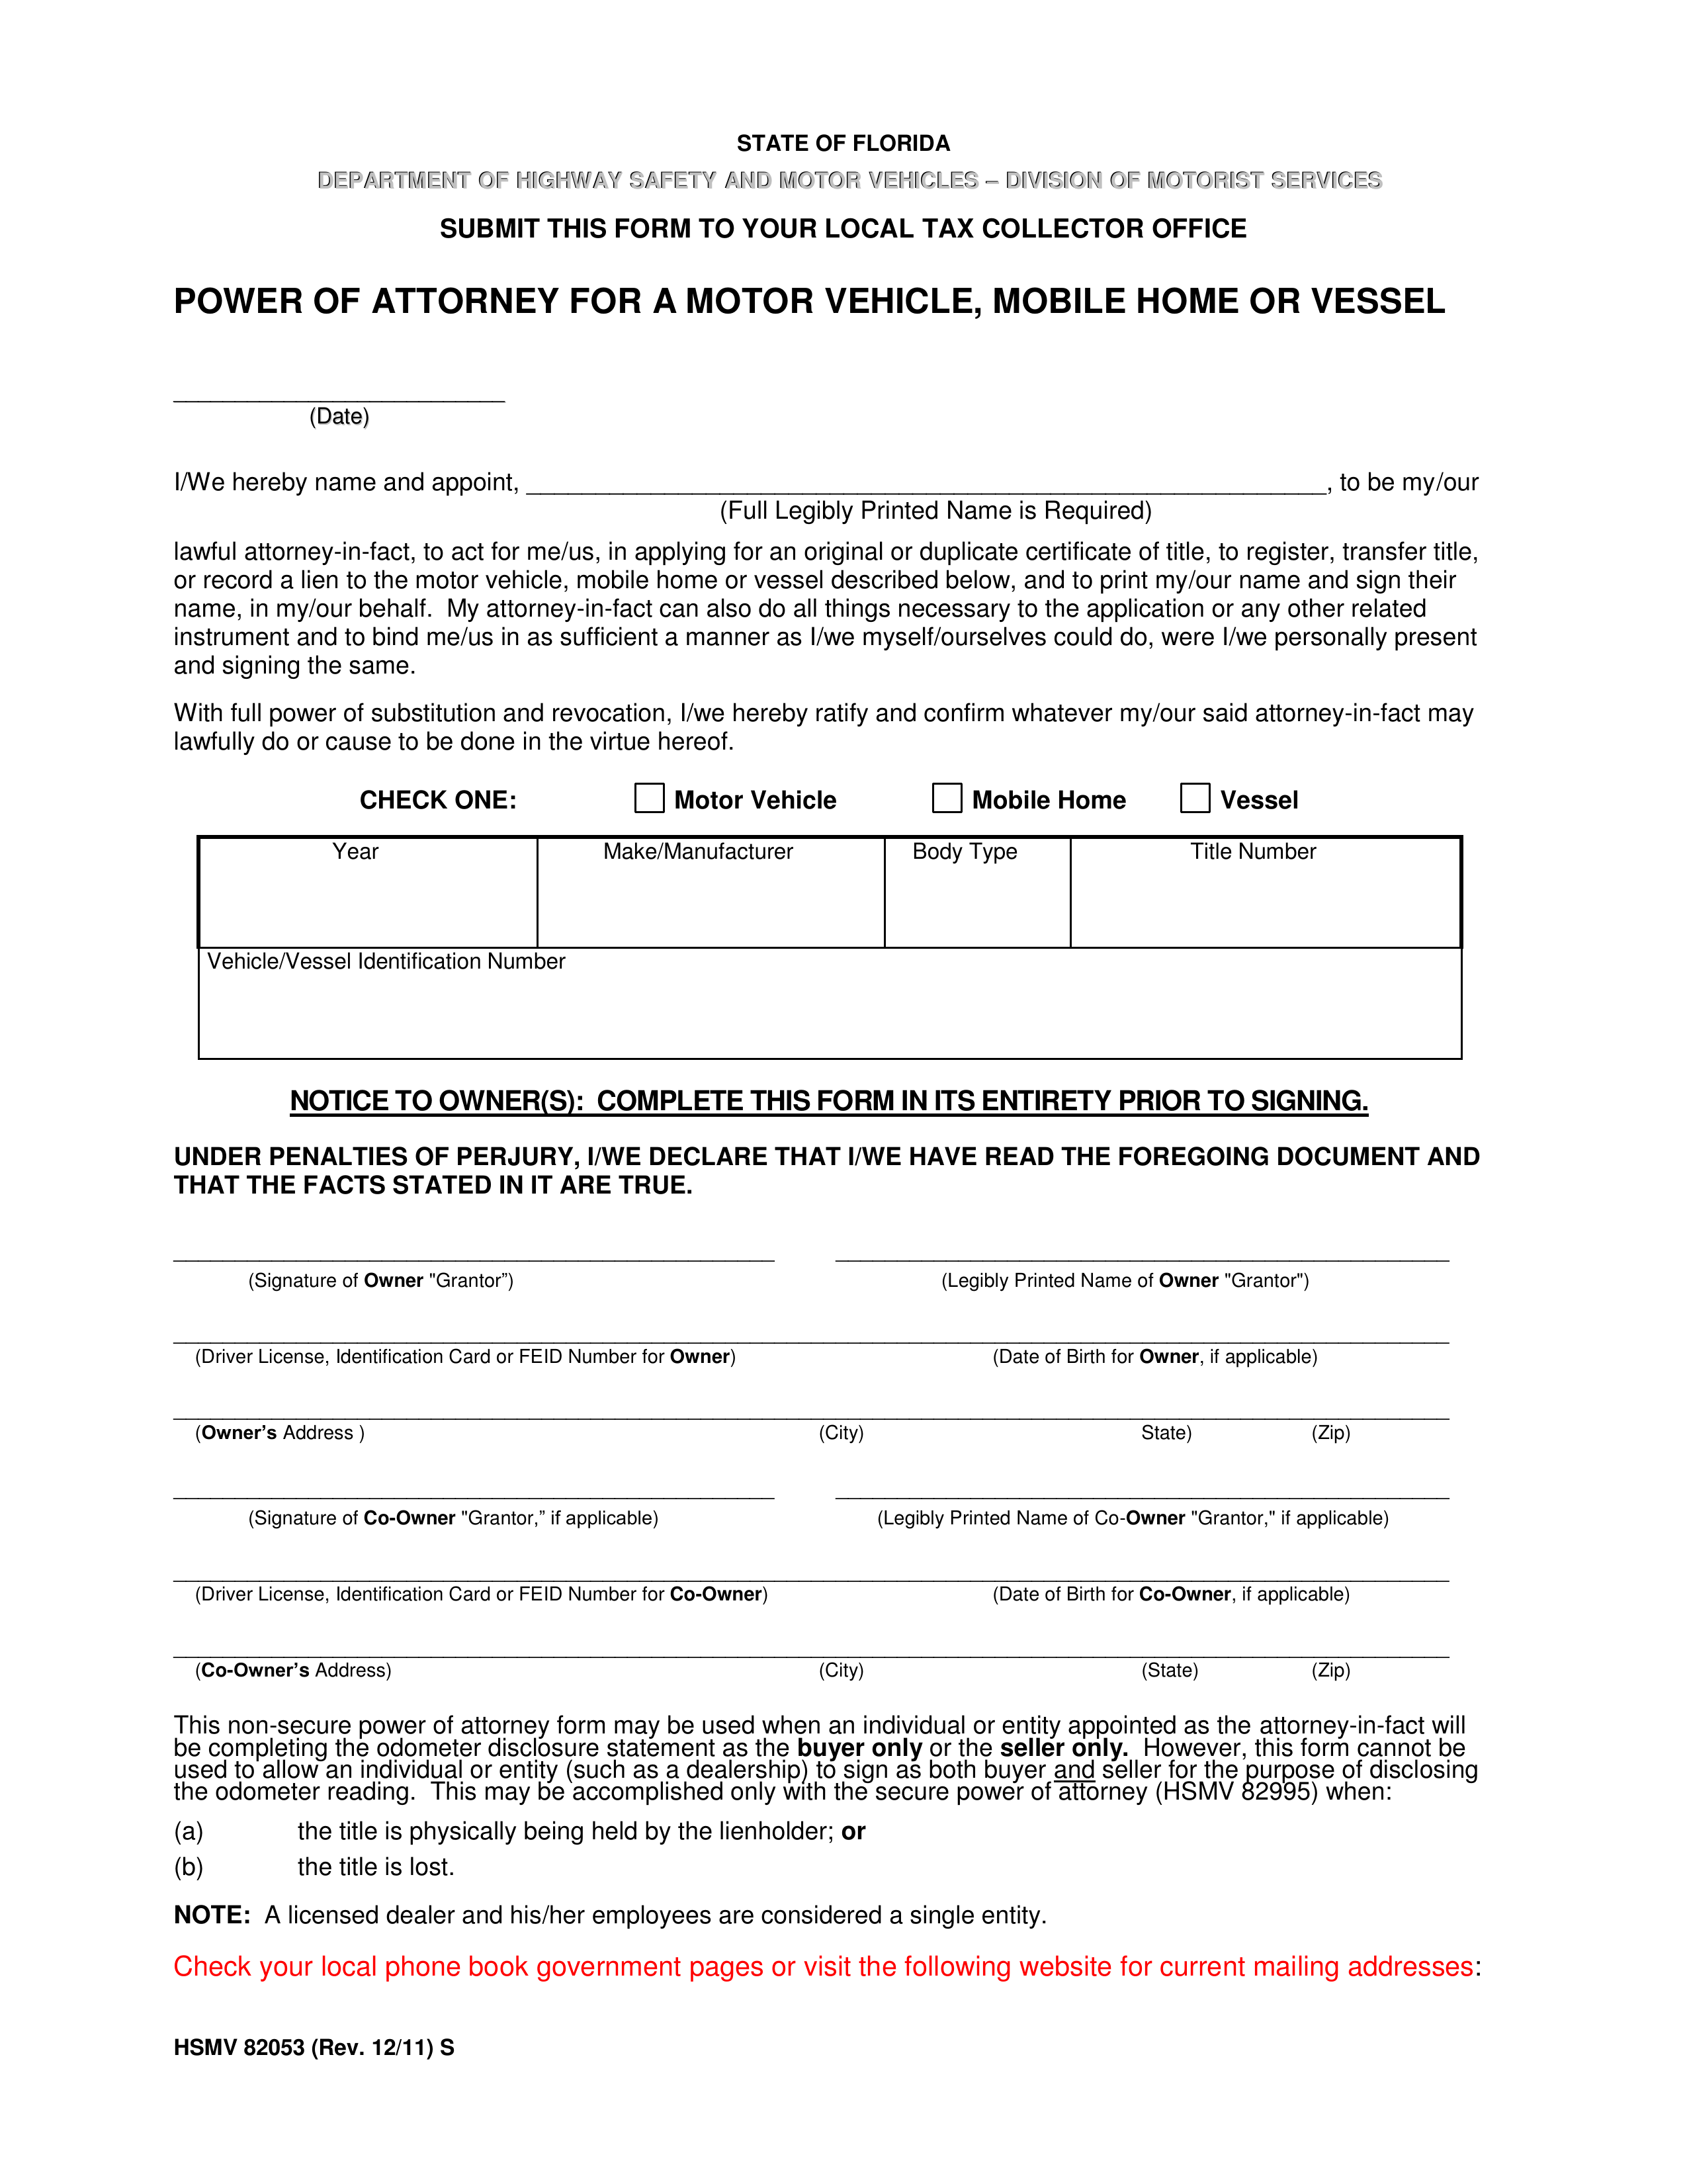 Free Florida Motor Vehicle Power Of Attorney Form HSMV 